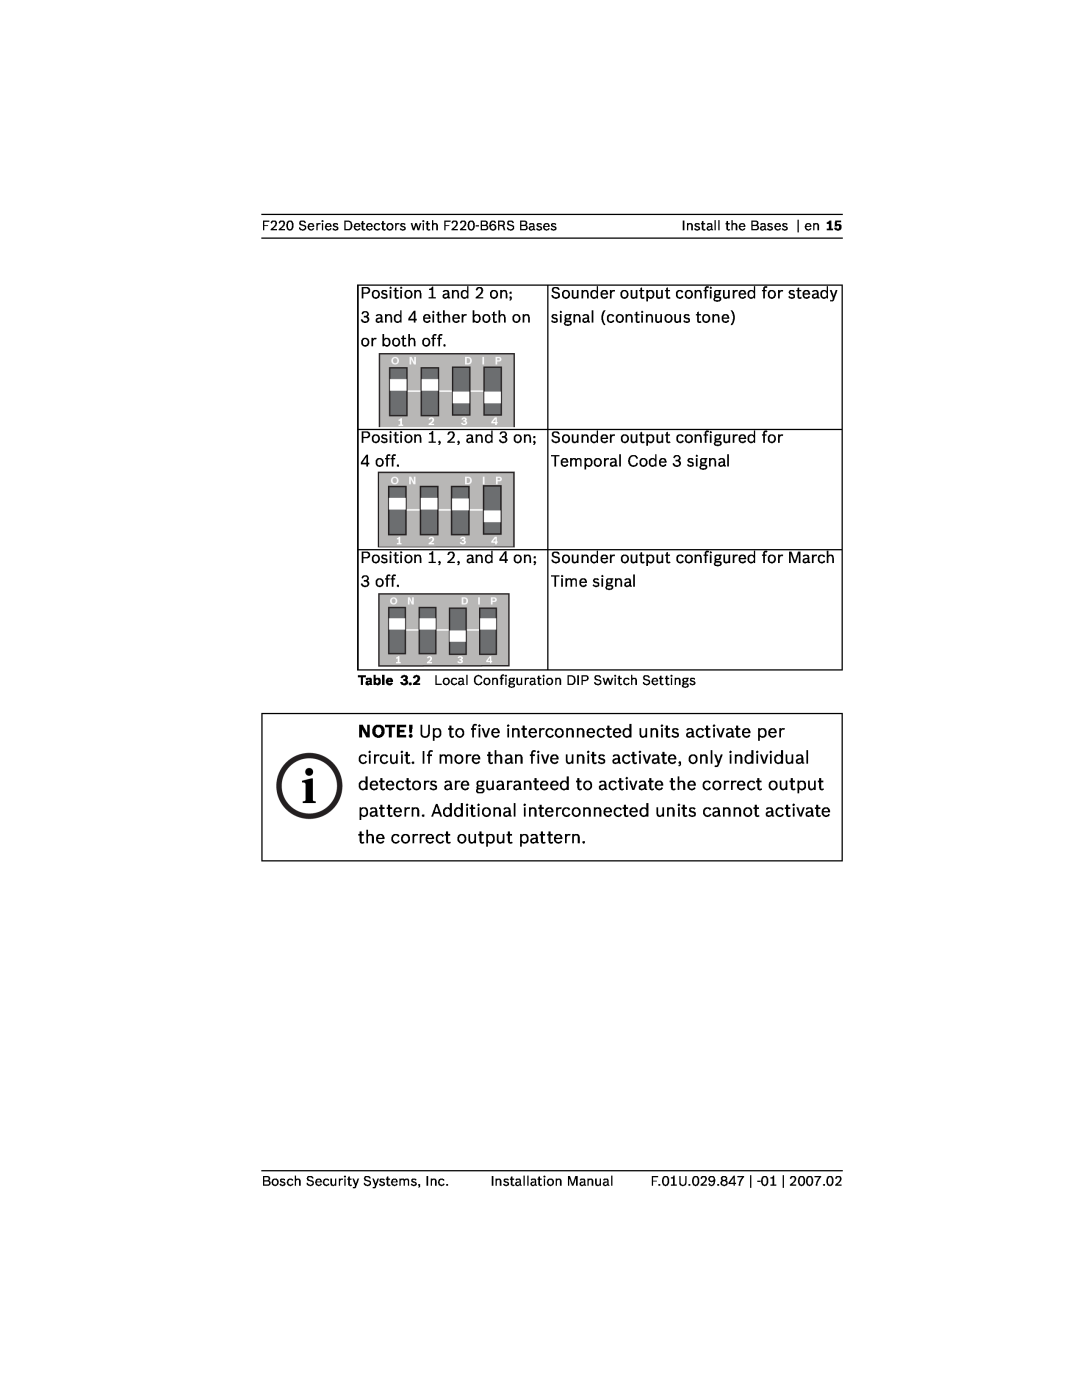 Bosch Appliances F220-B6RS installation manual Position 1 and 2 on 